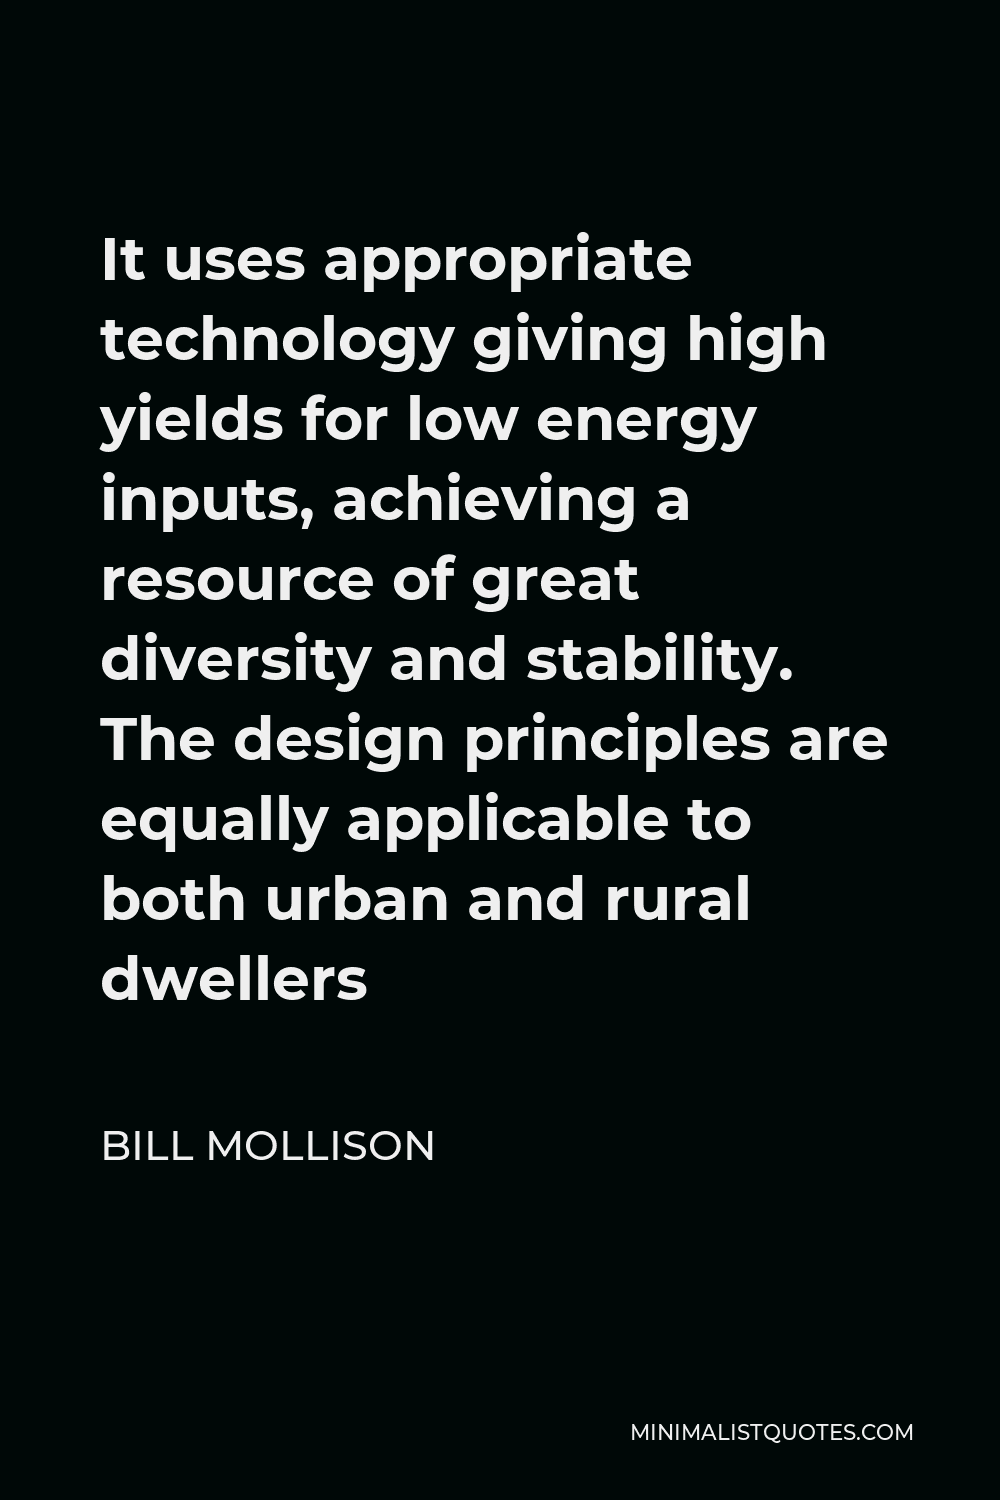 Bill Mollison Quote - It uses appropriate technology giving high yields for low energy inputs, achieving a resource of great diversity and stability. The design principles are equally applicable to both urban and rural dwellers